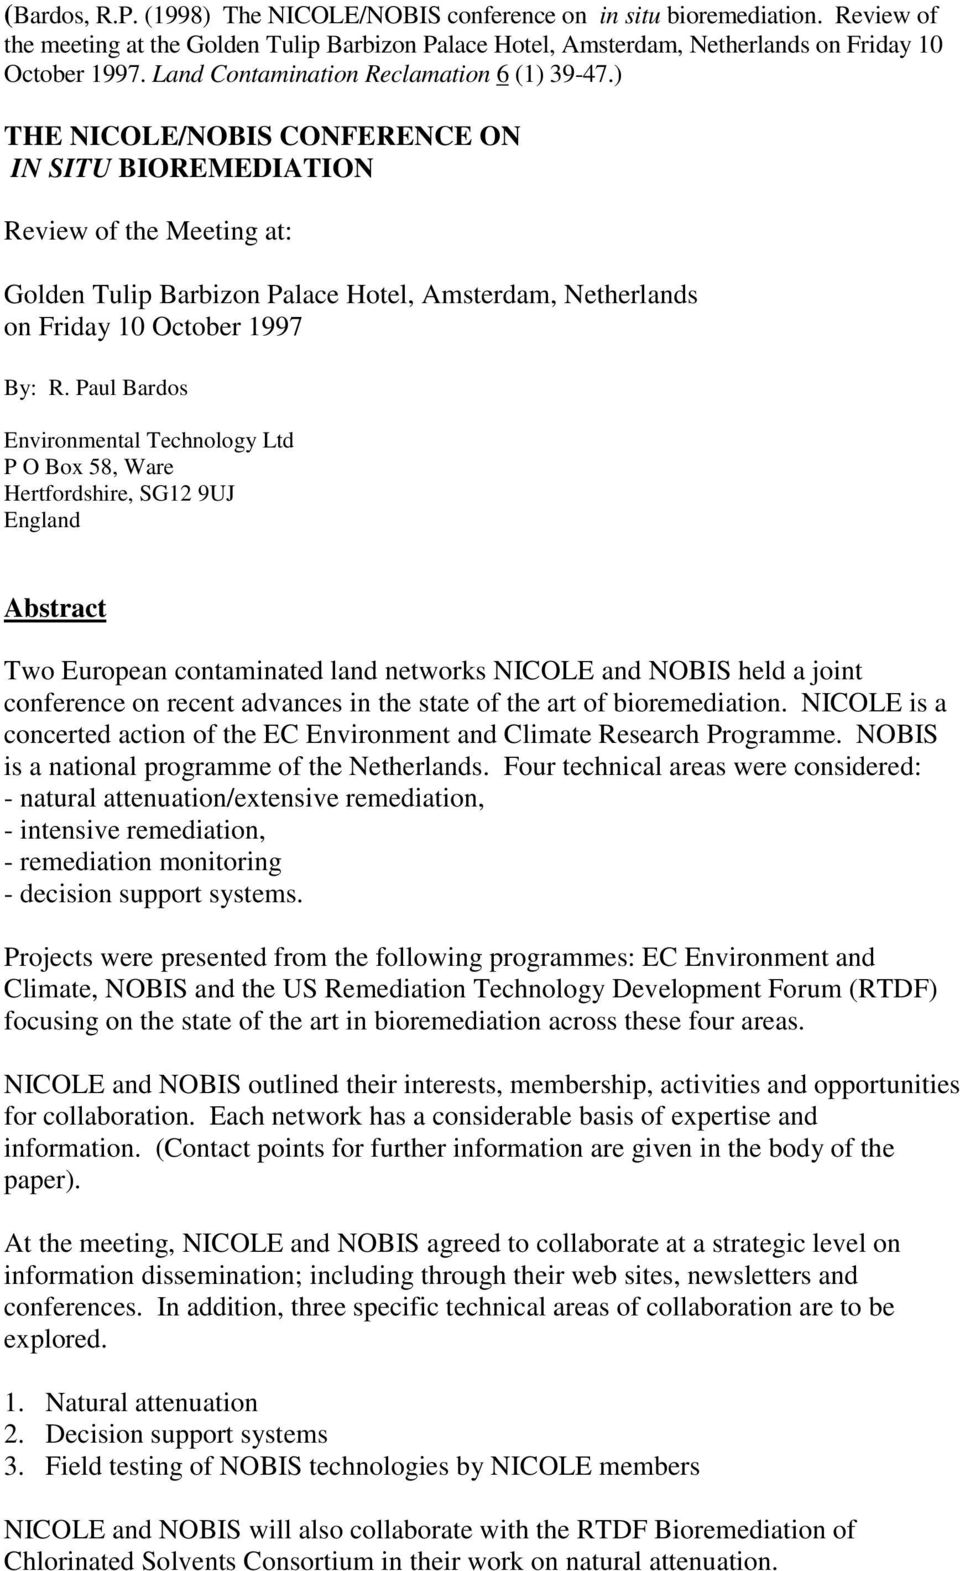 ) THE NICOLE/NOBIS CONFERENCE ON IN SITU BIOREMEDIATION Review of the Meeting at: Golden Tulip Barbizon Palace Hotel, Amsterdam, Netherlands on Friday 10 October 1997 By: R.